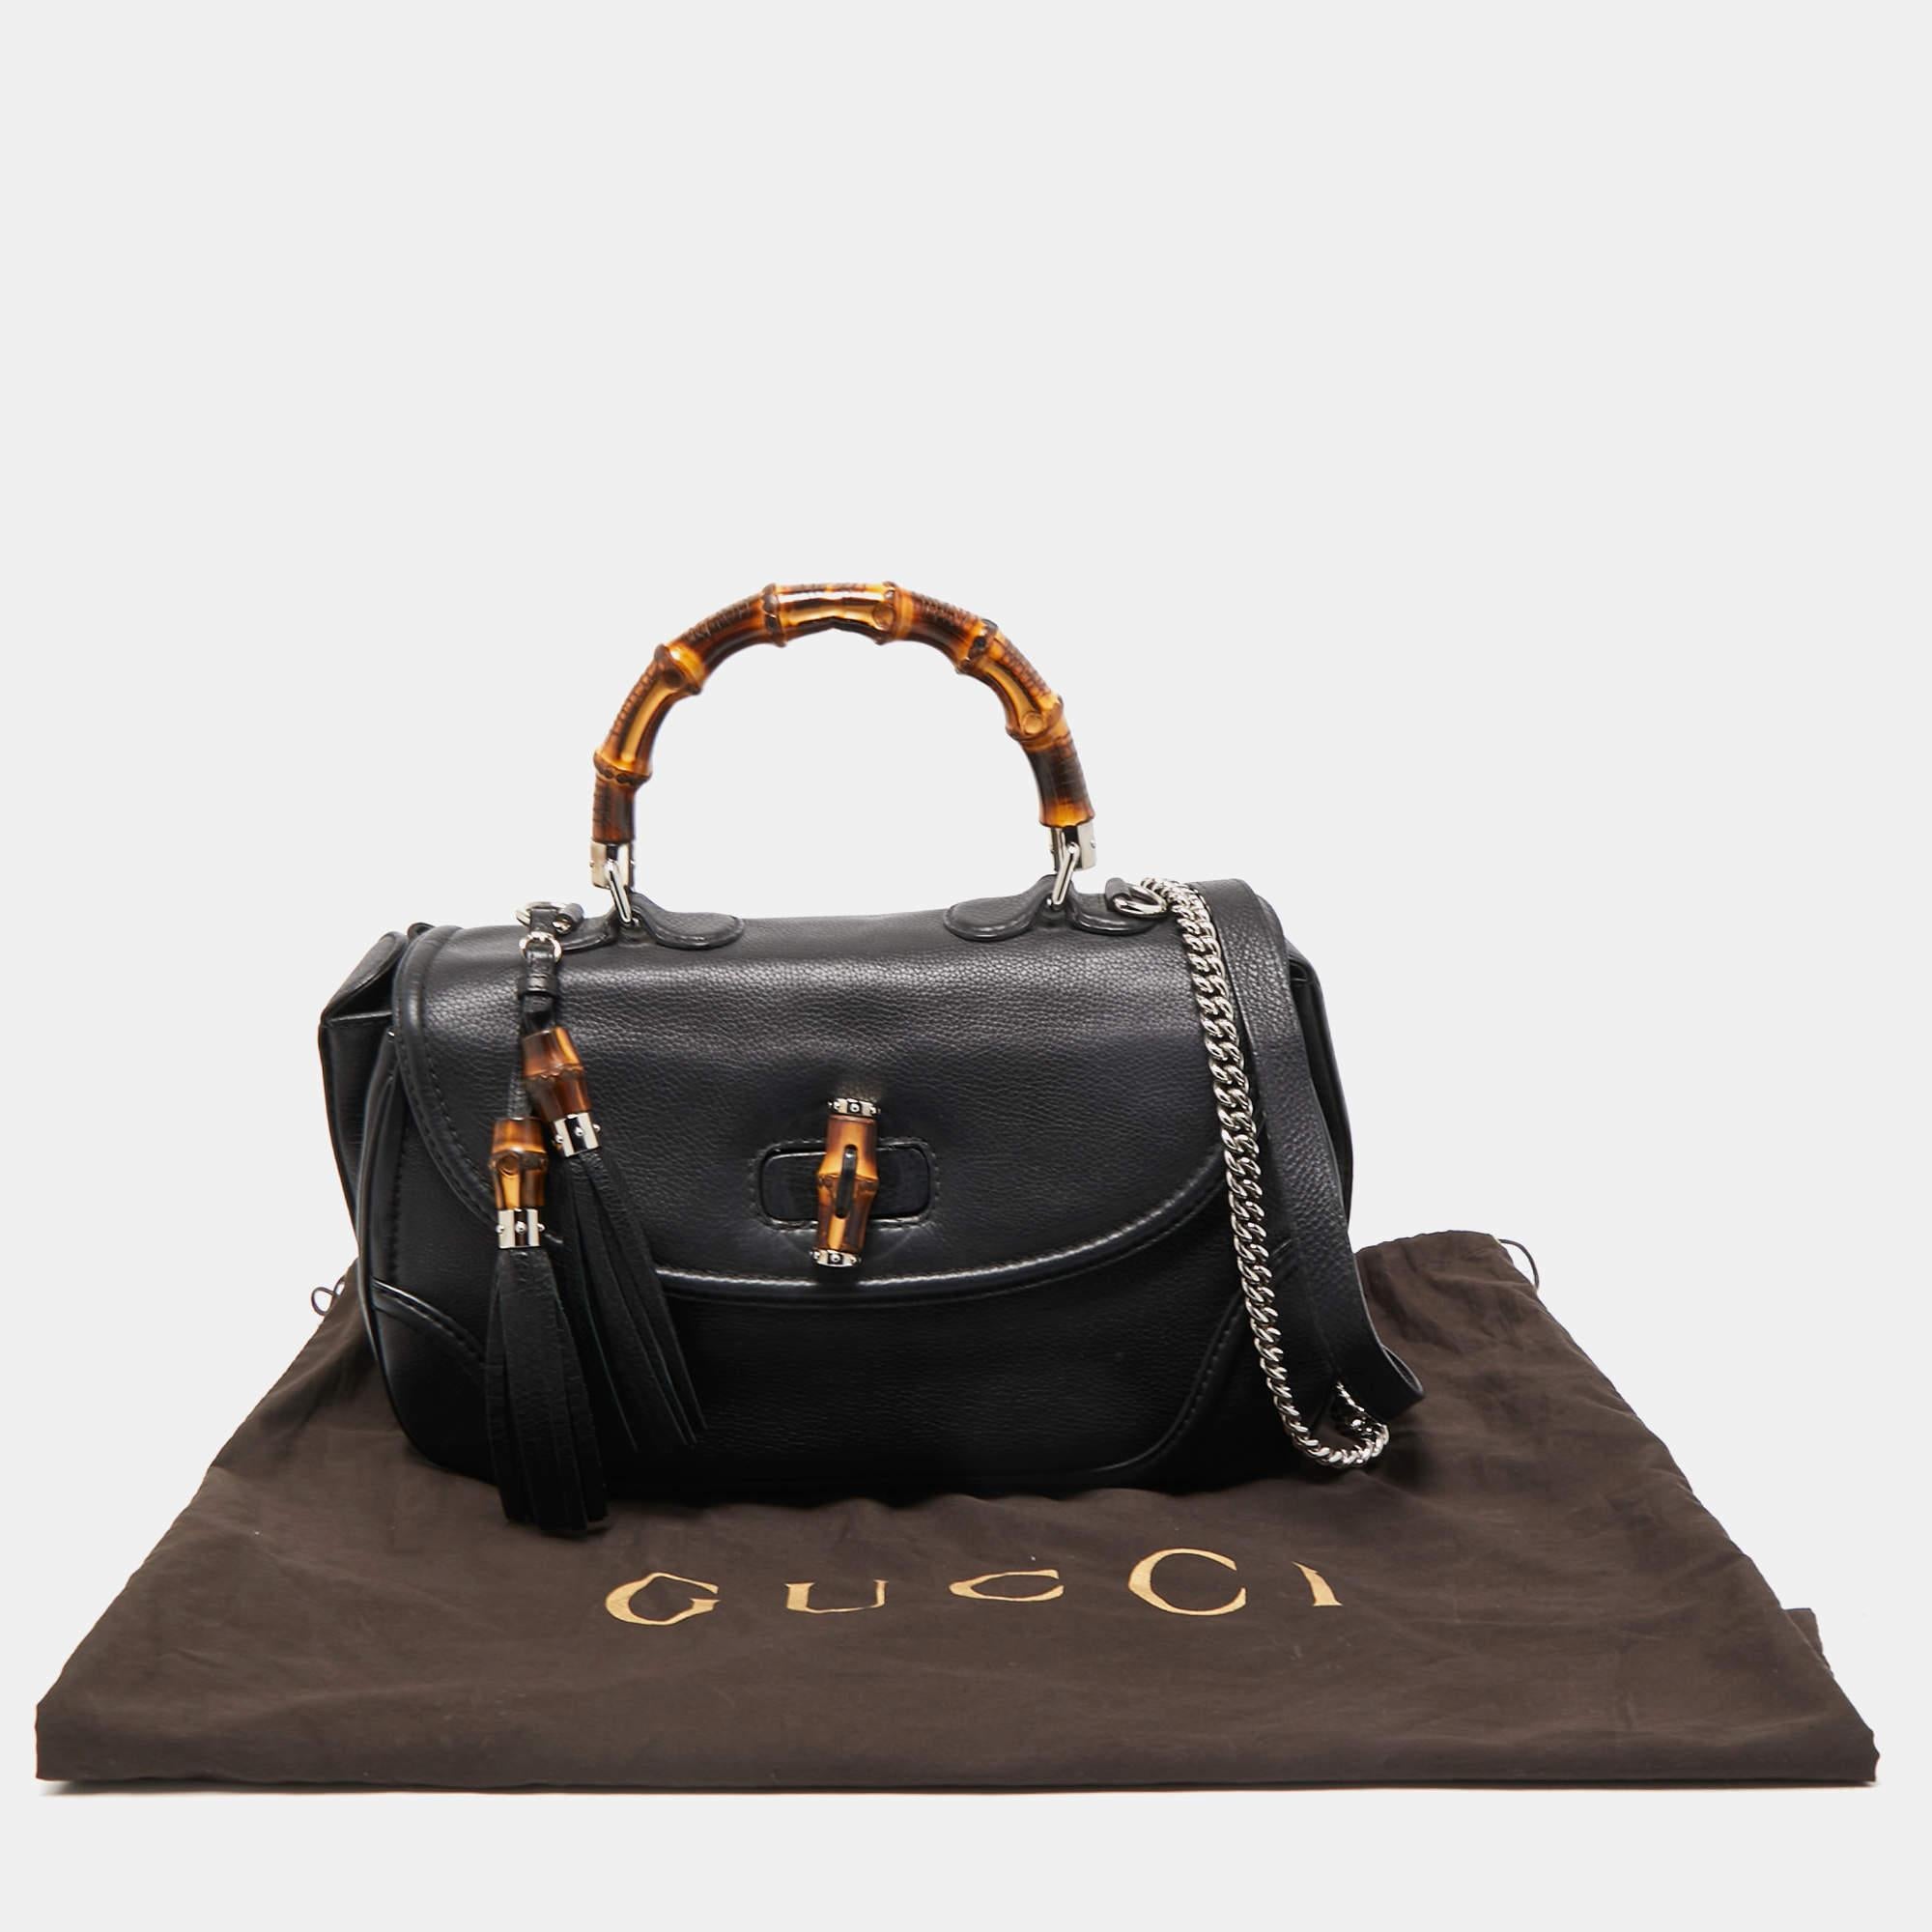 Gucci Black Leather Large New Bamboo Tassel Top Handle Bag 10